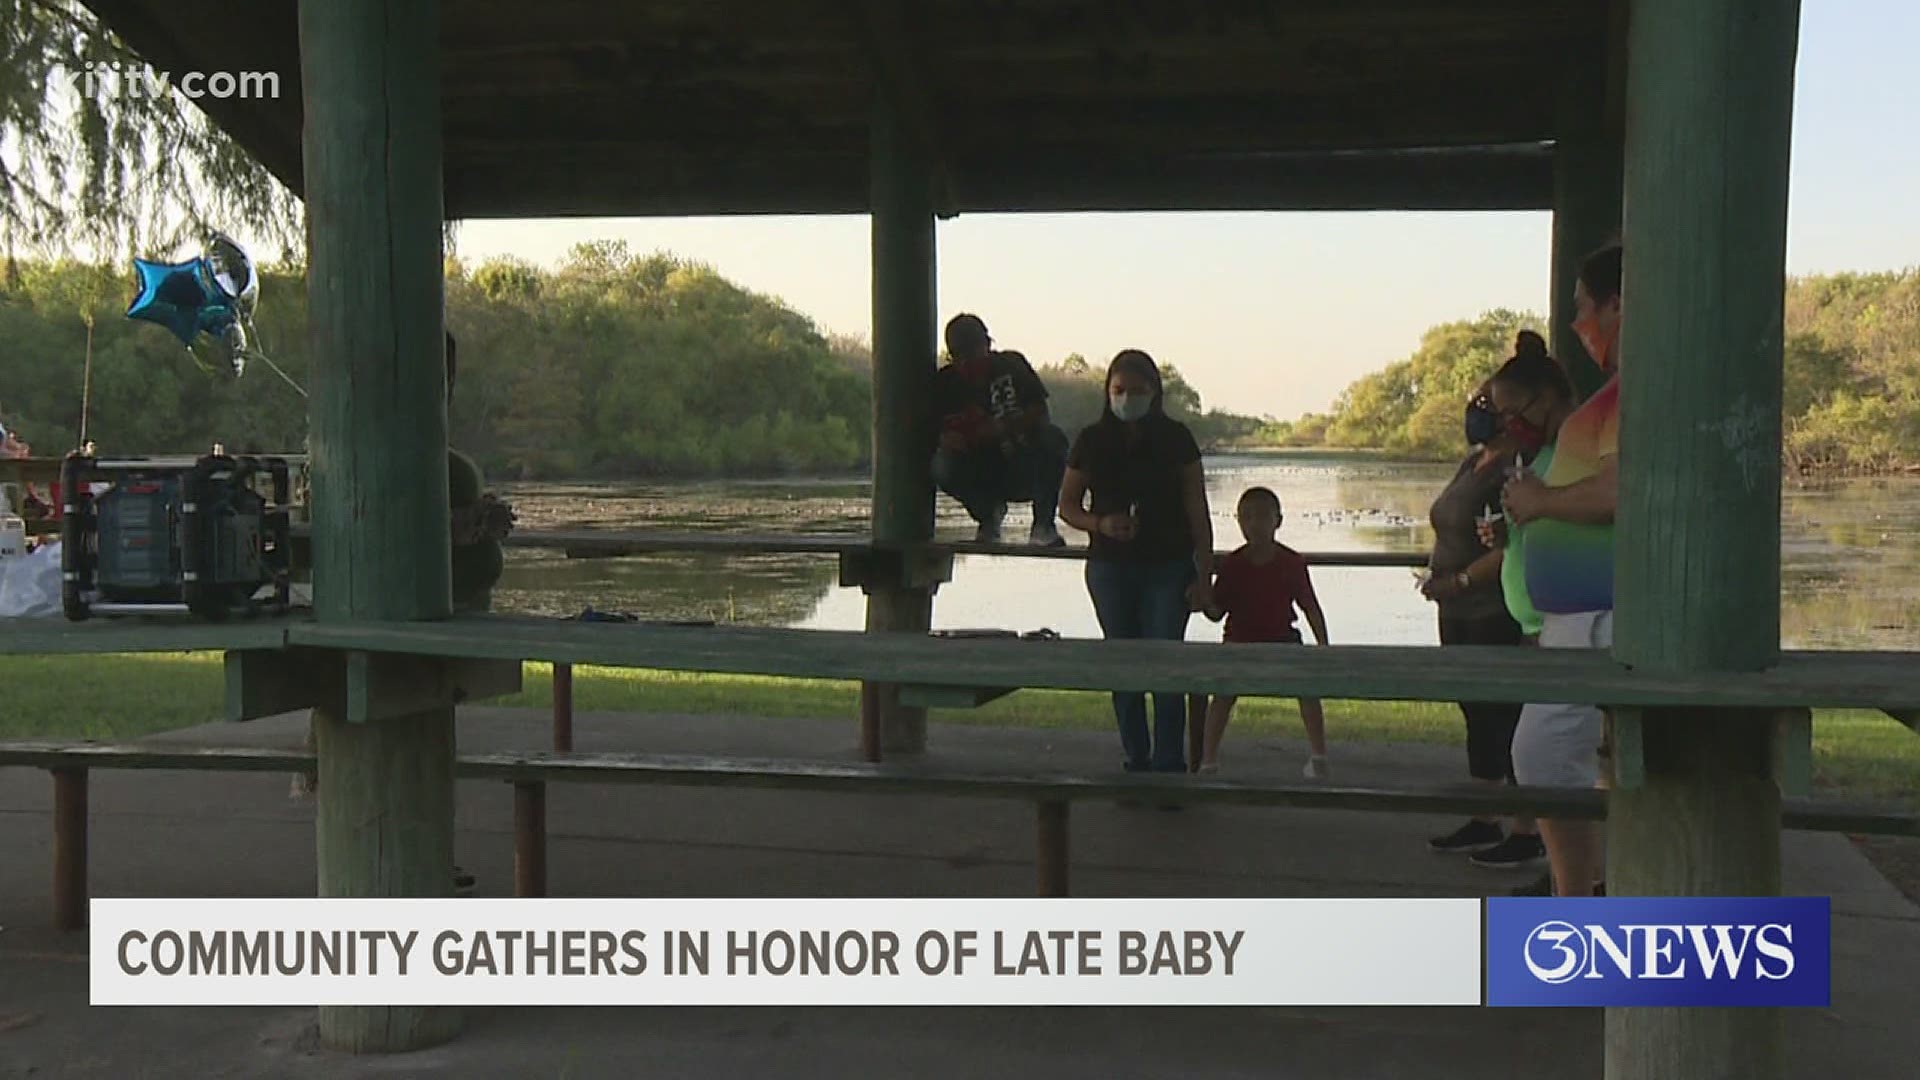 Community members came together for a small prayer vigil in memory of a baby boy who tragically died last week.